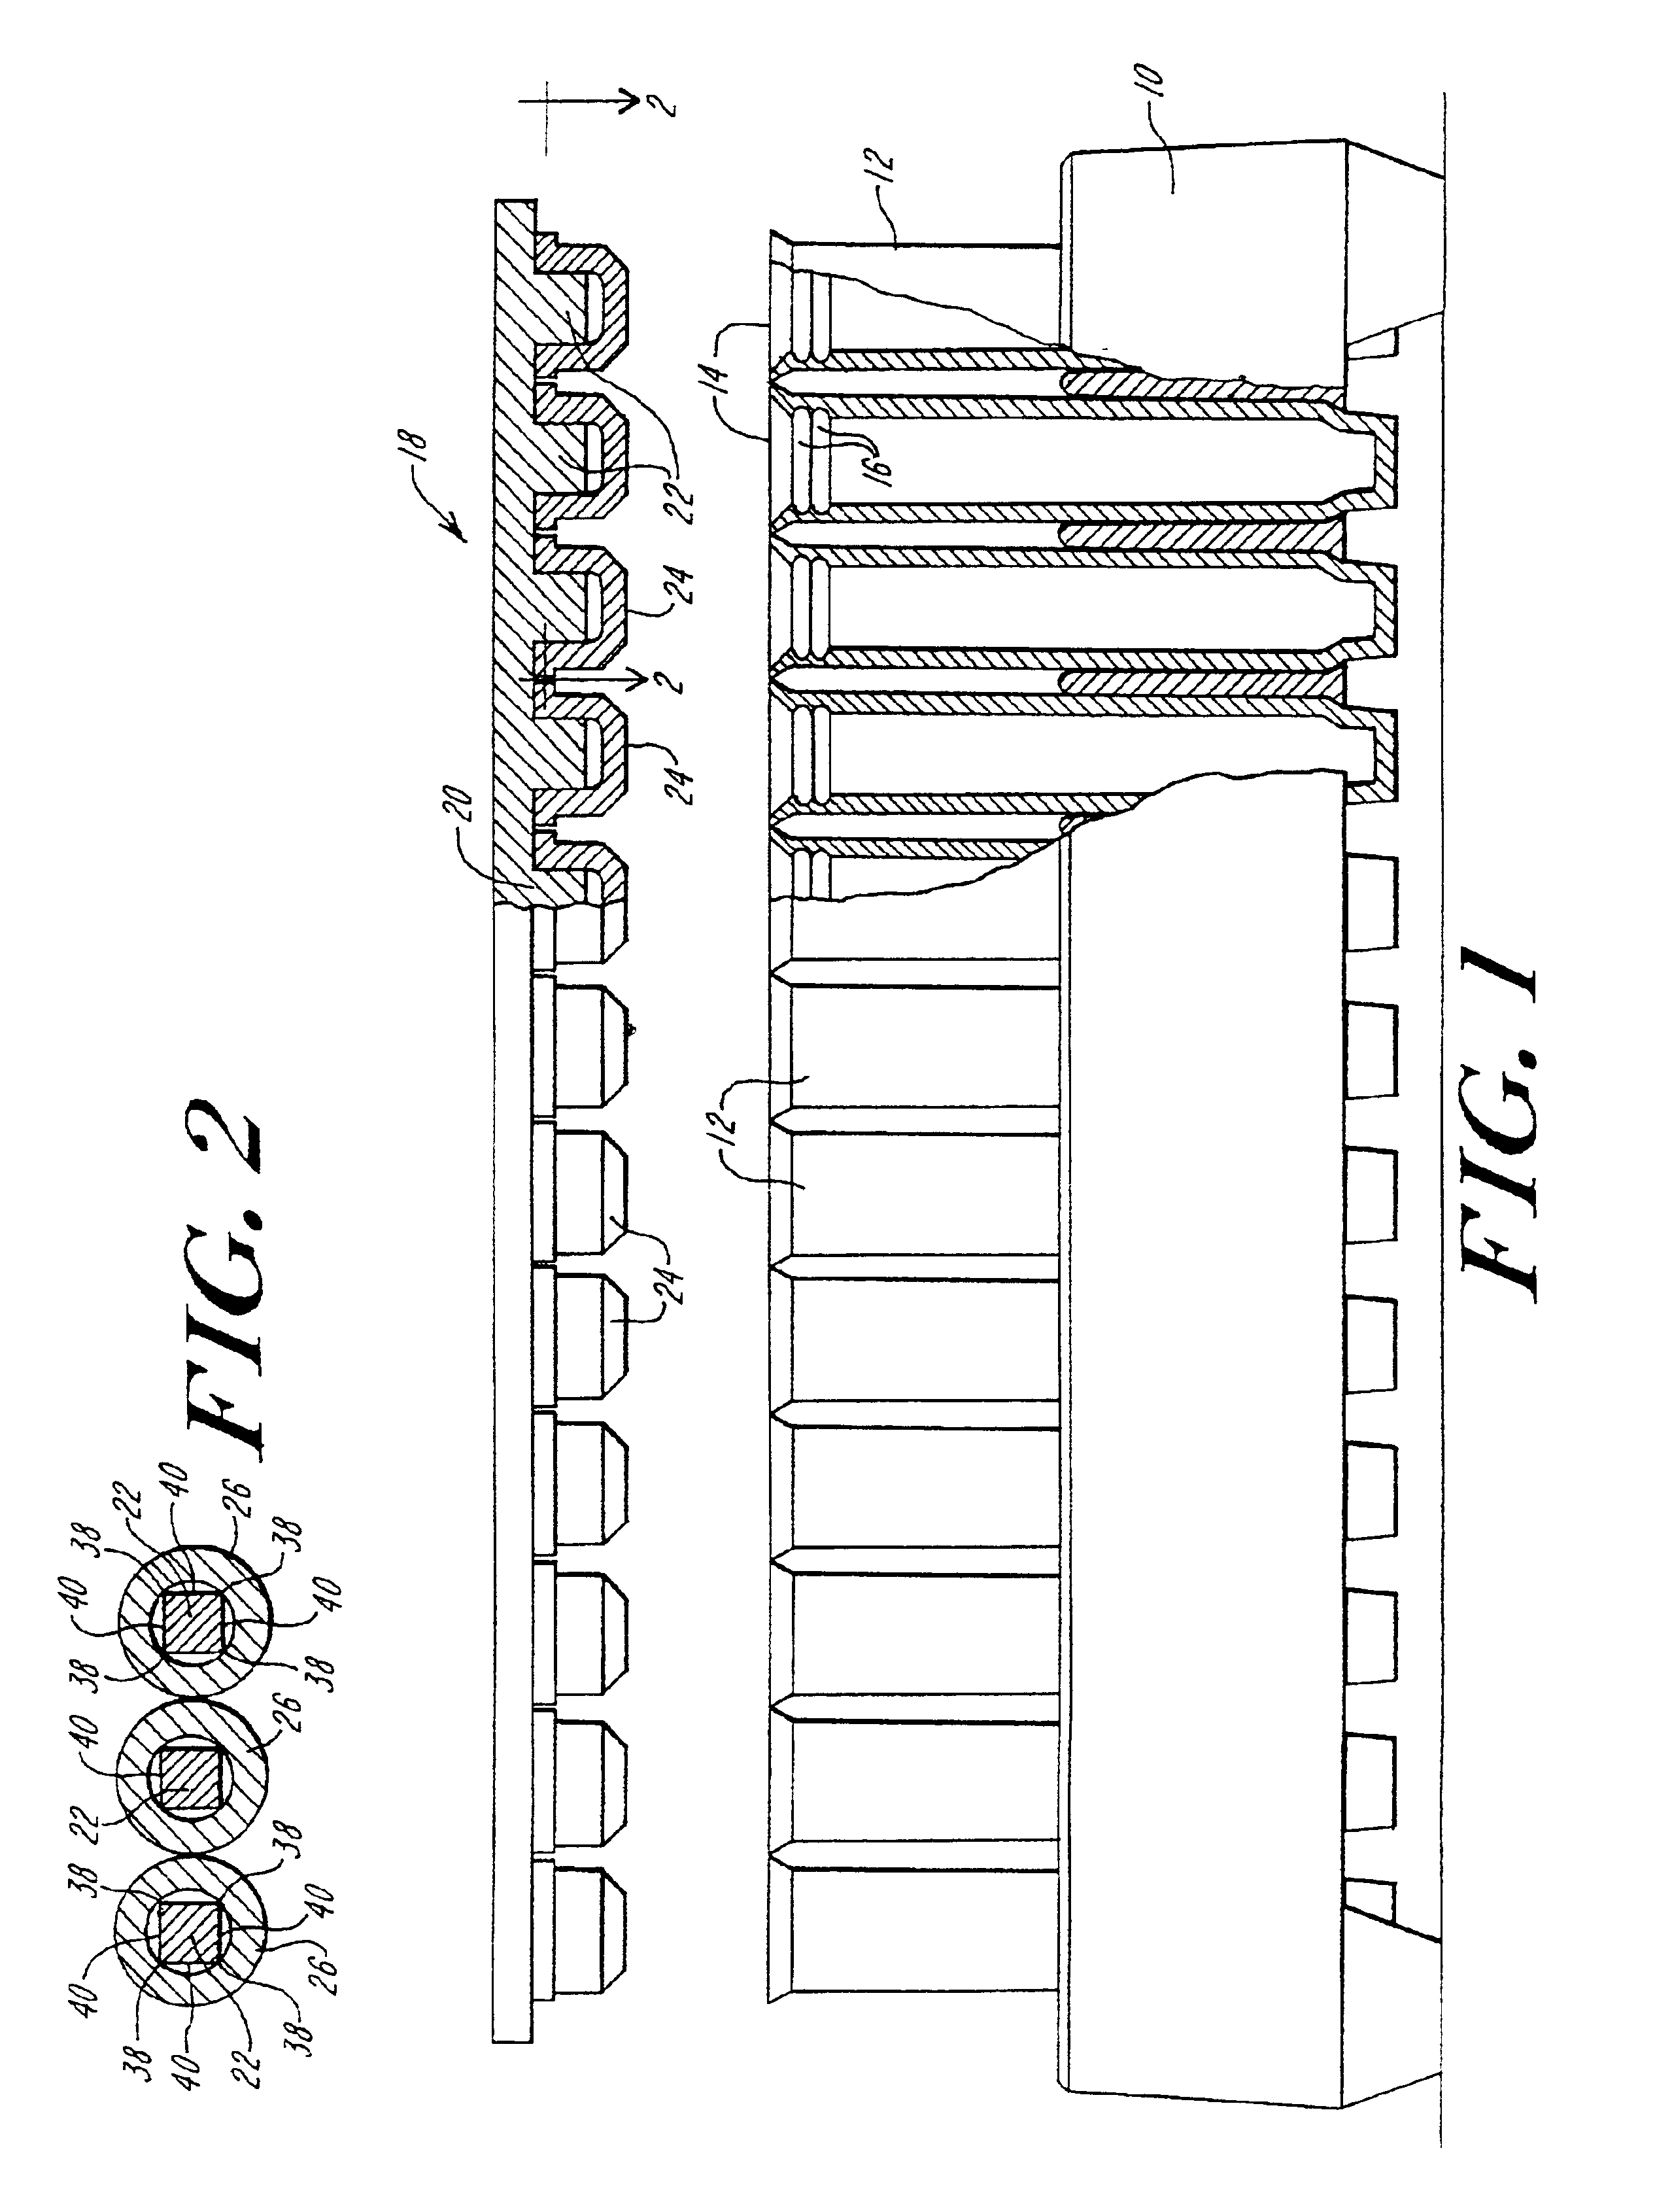 Apparatus for sealing test tubes and the like